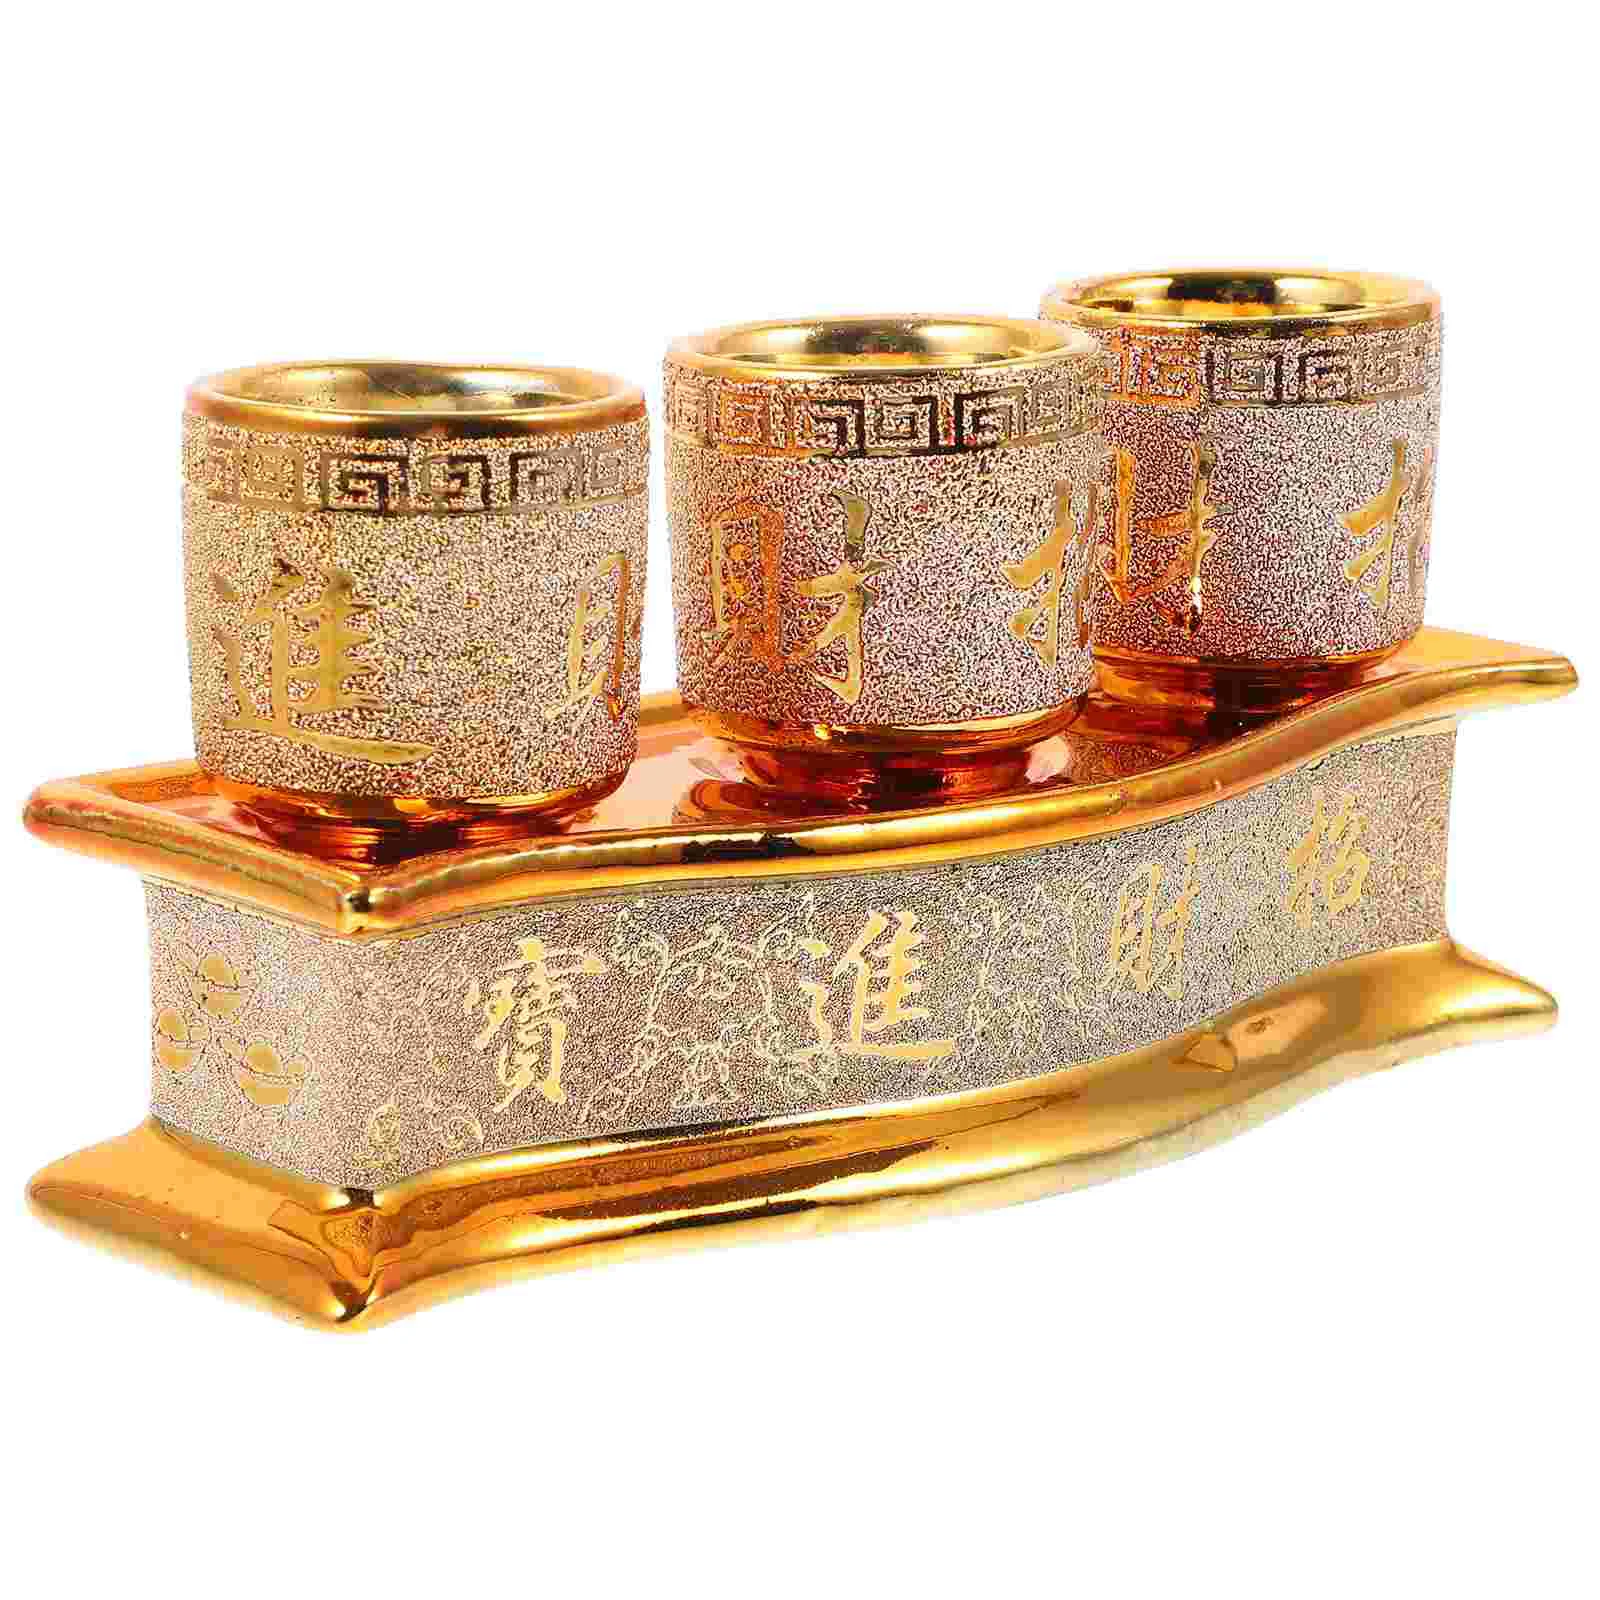 

Sands Water Supply Cup Container Sacrifice Offering Holy Glasses Ceramic Porcelain Household Supplies